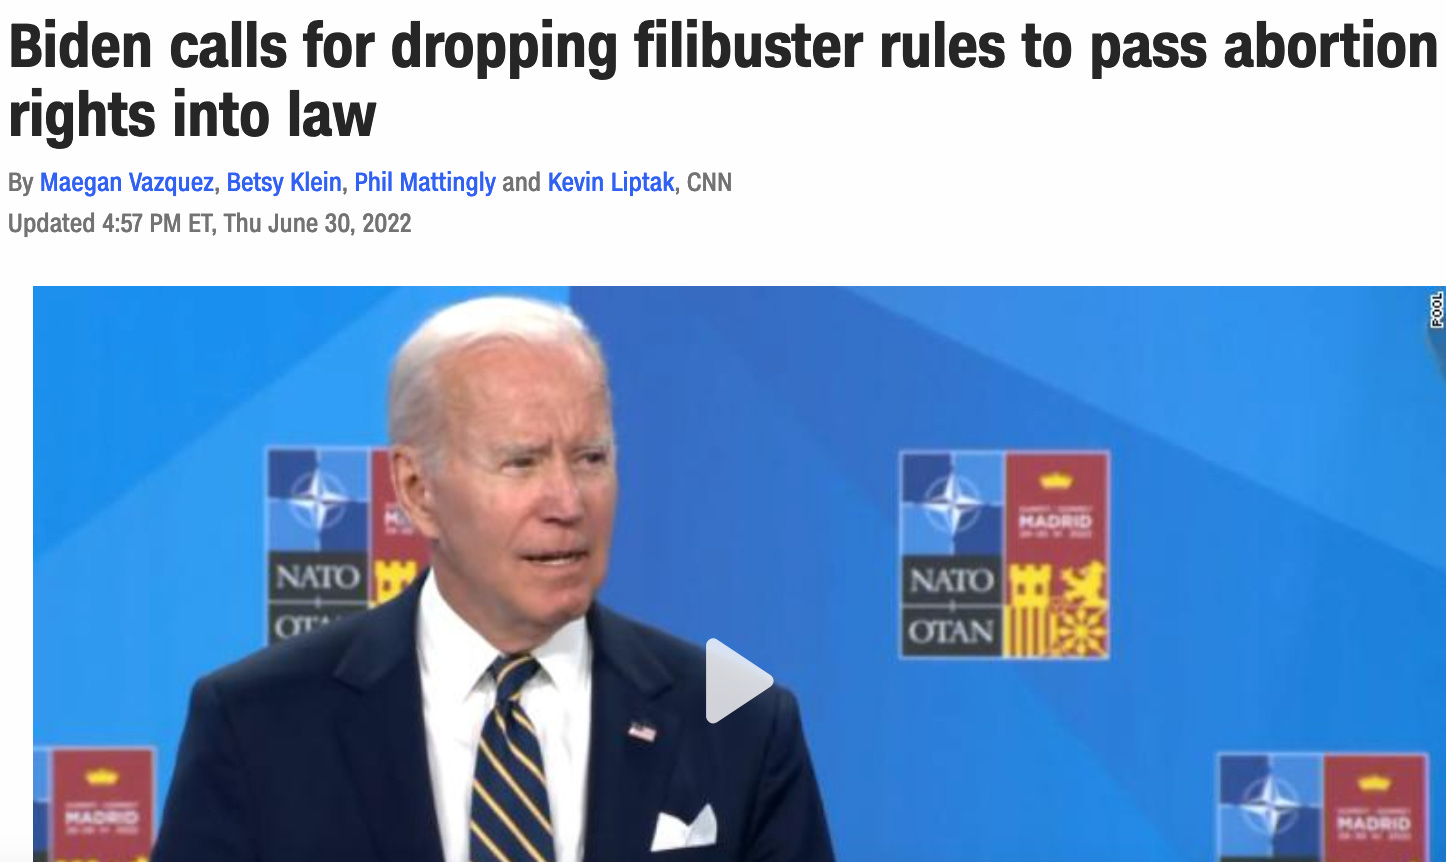 A screenshot from a CNN story with the headline "Biden calls for dropping filibuster rules to pass abortion rights into law"